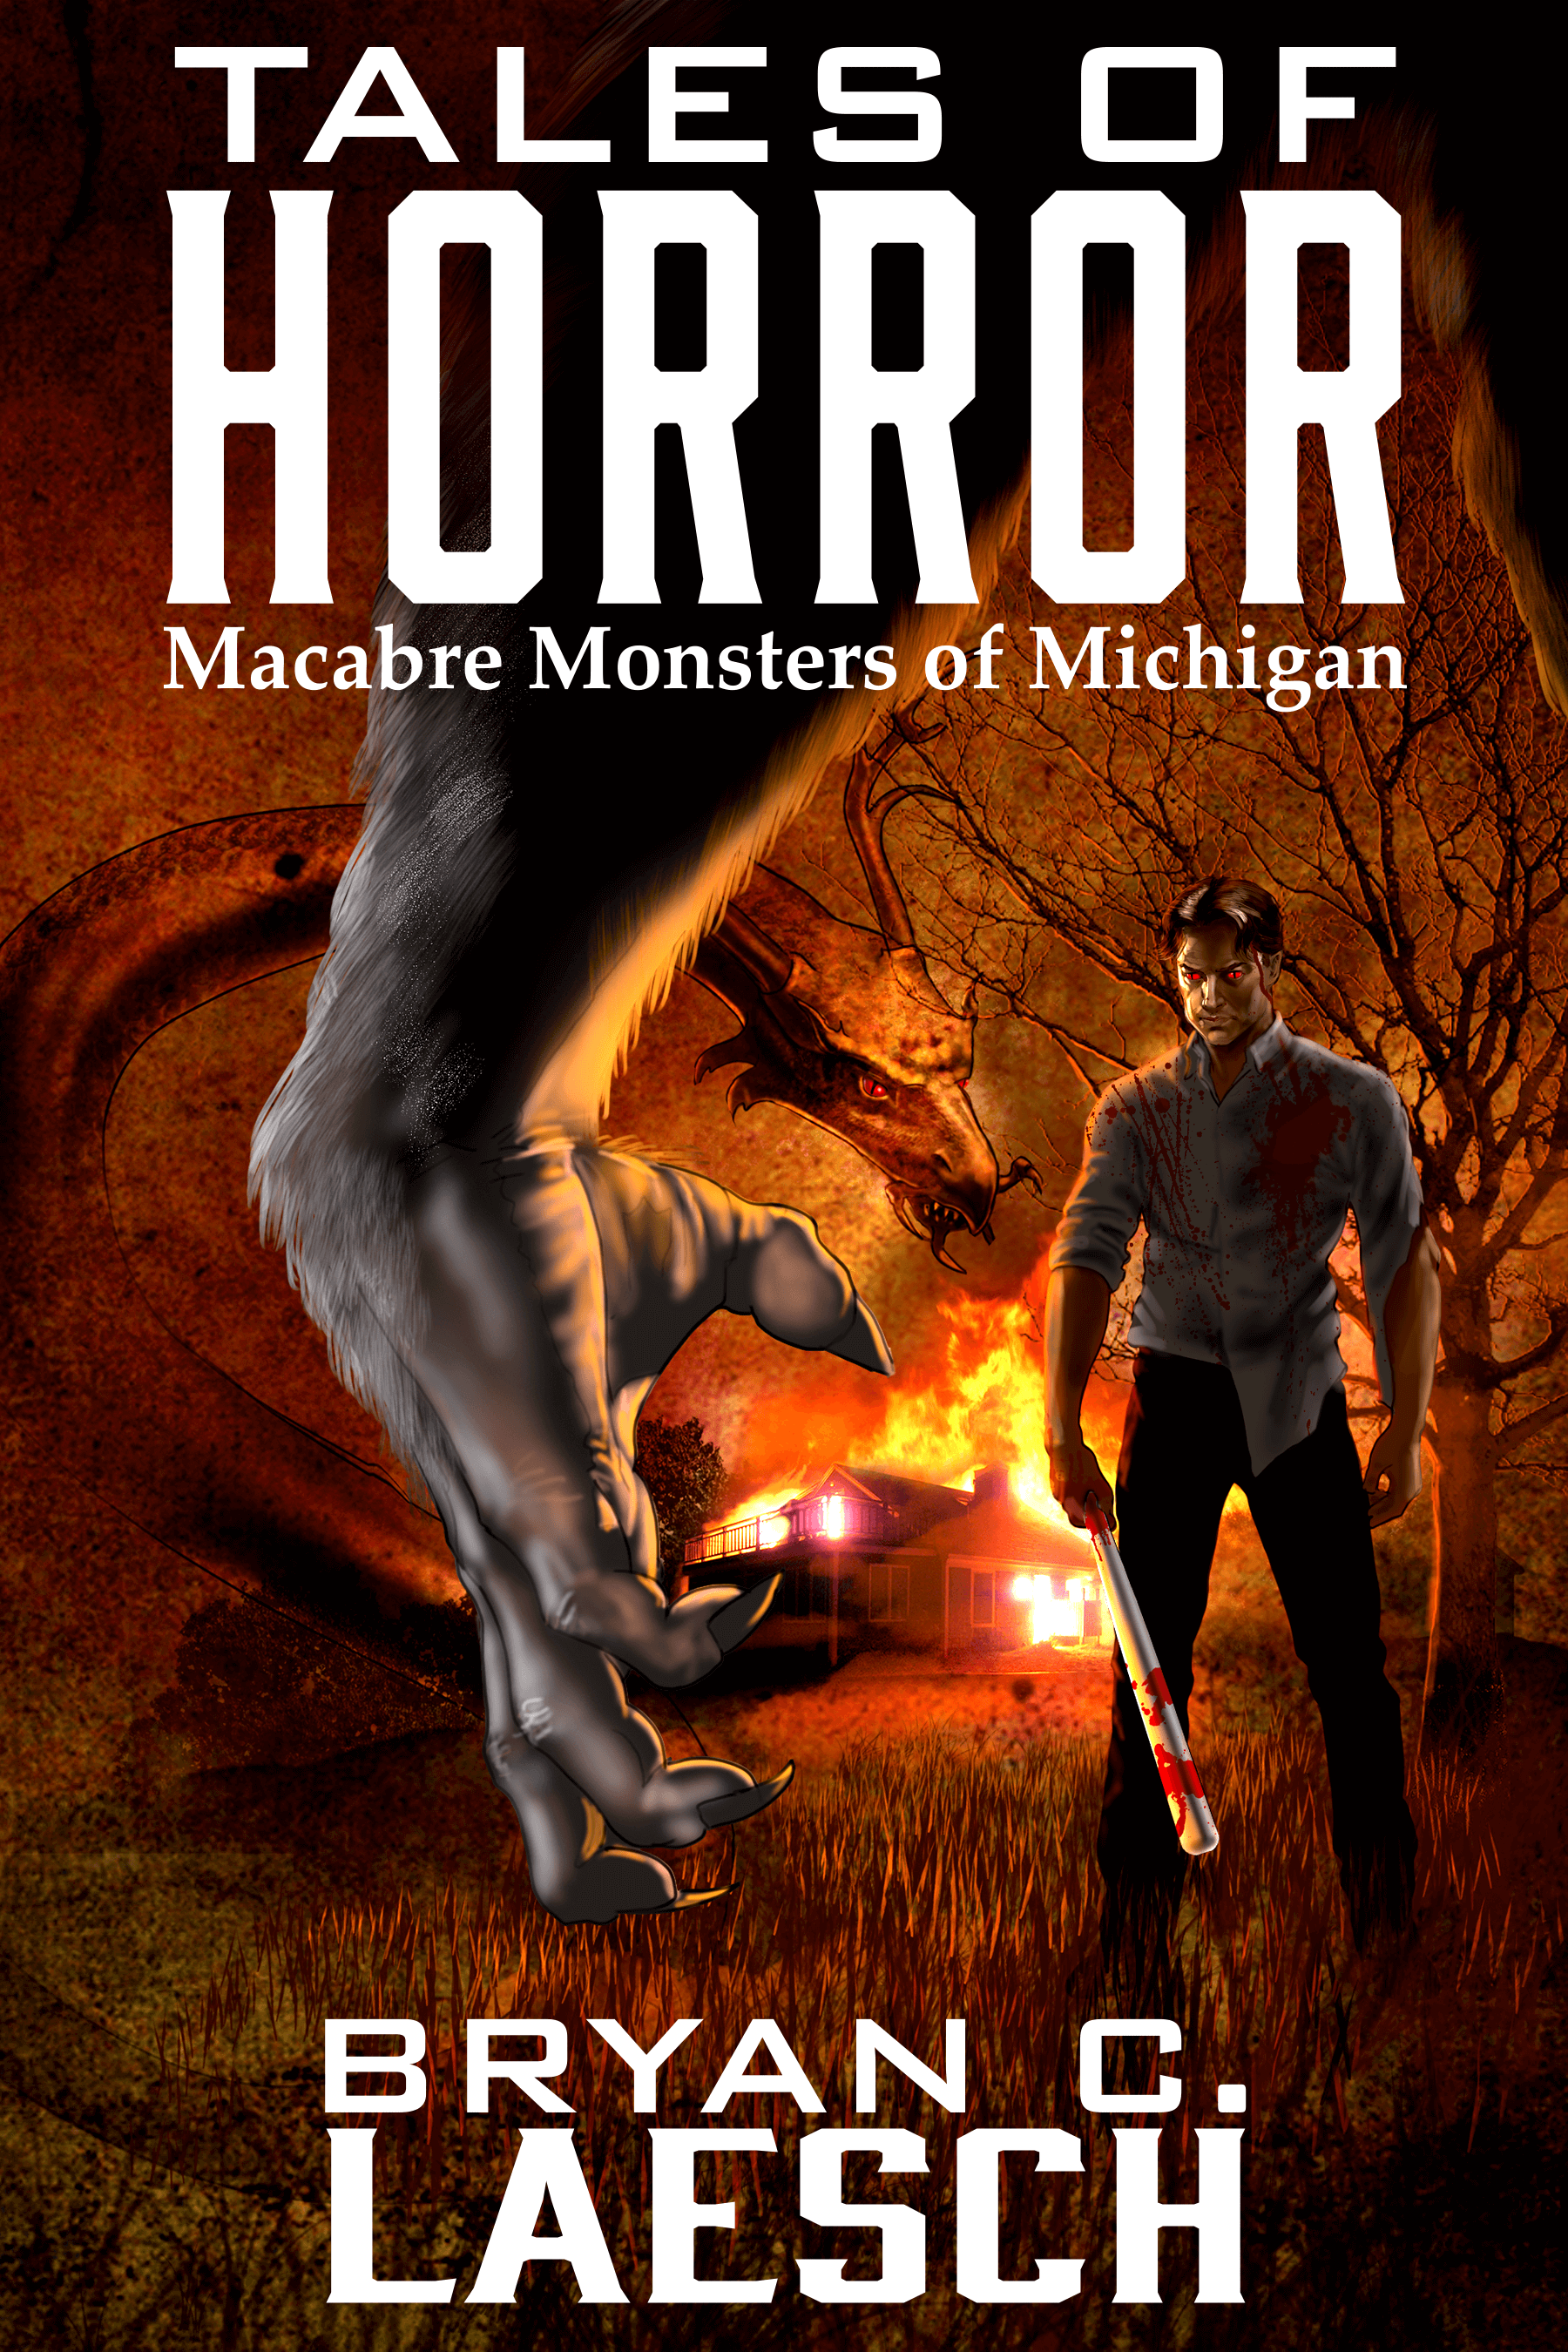 Tales of Horror by Bryan Laesch cover design by Corvid Design